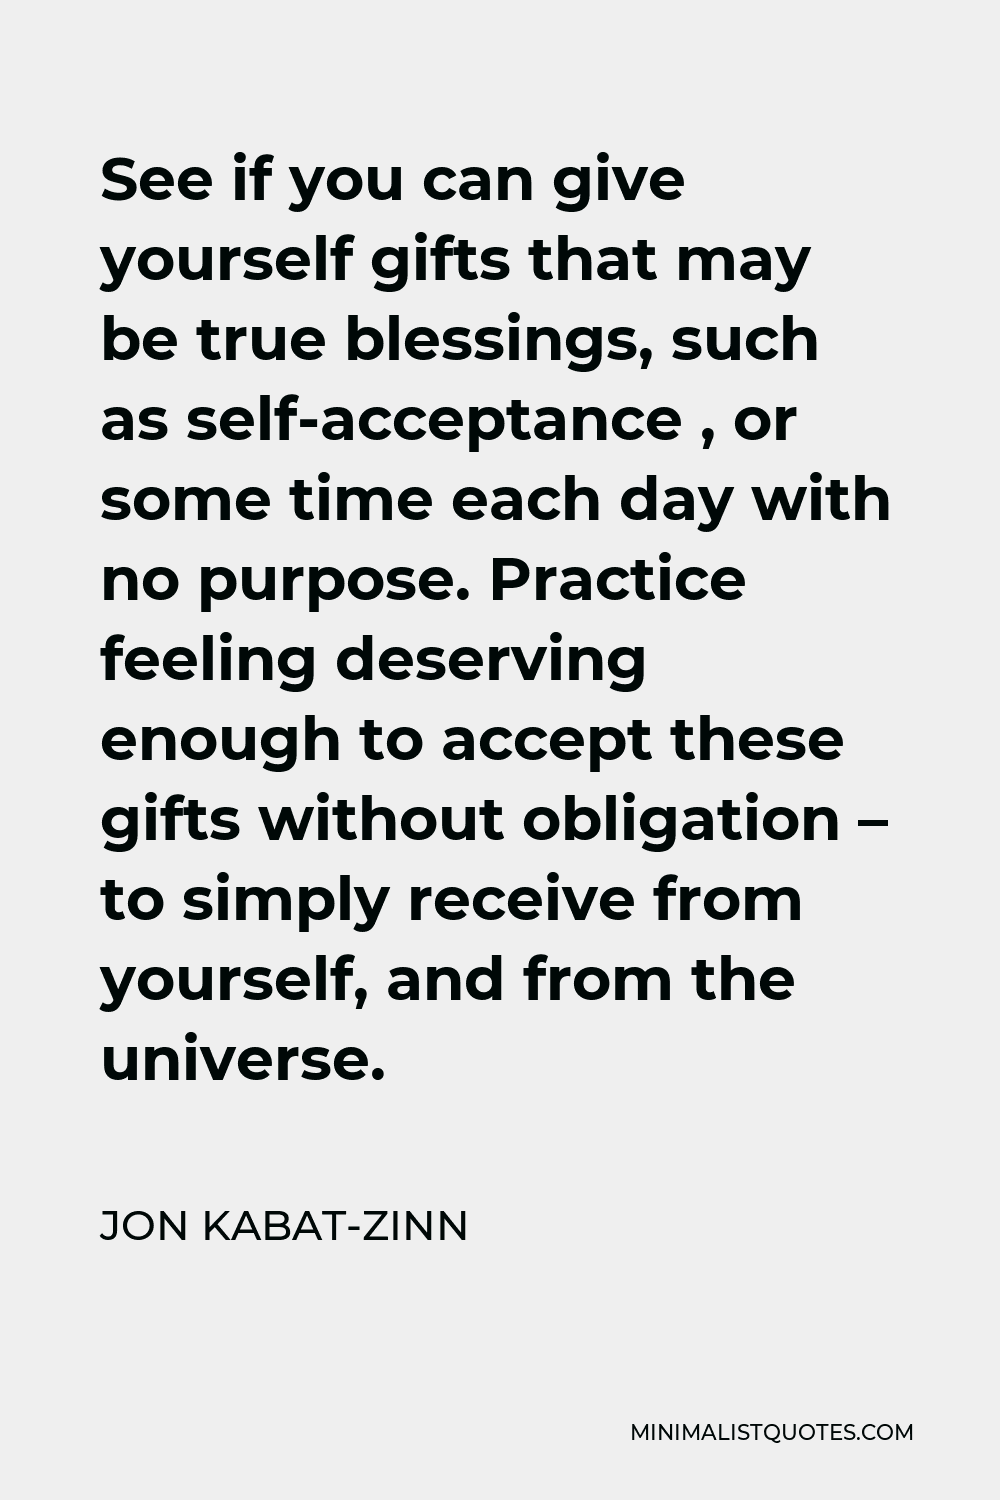 Jon Kabat-Zinn Quote - See if you can give yourself gifts that may be true blessings, such as self-acceptance , or some time each day with no purpose. Practice feeling deserving enough to accept these gifts without obligation – to simply receive from yourself, and from the universe.